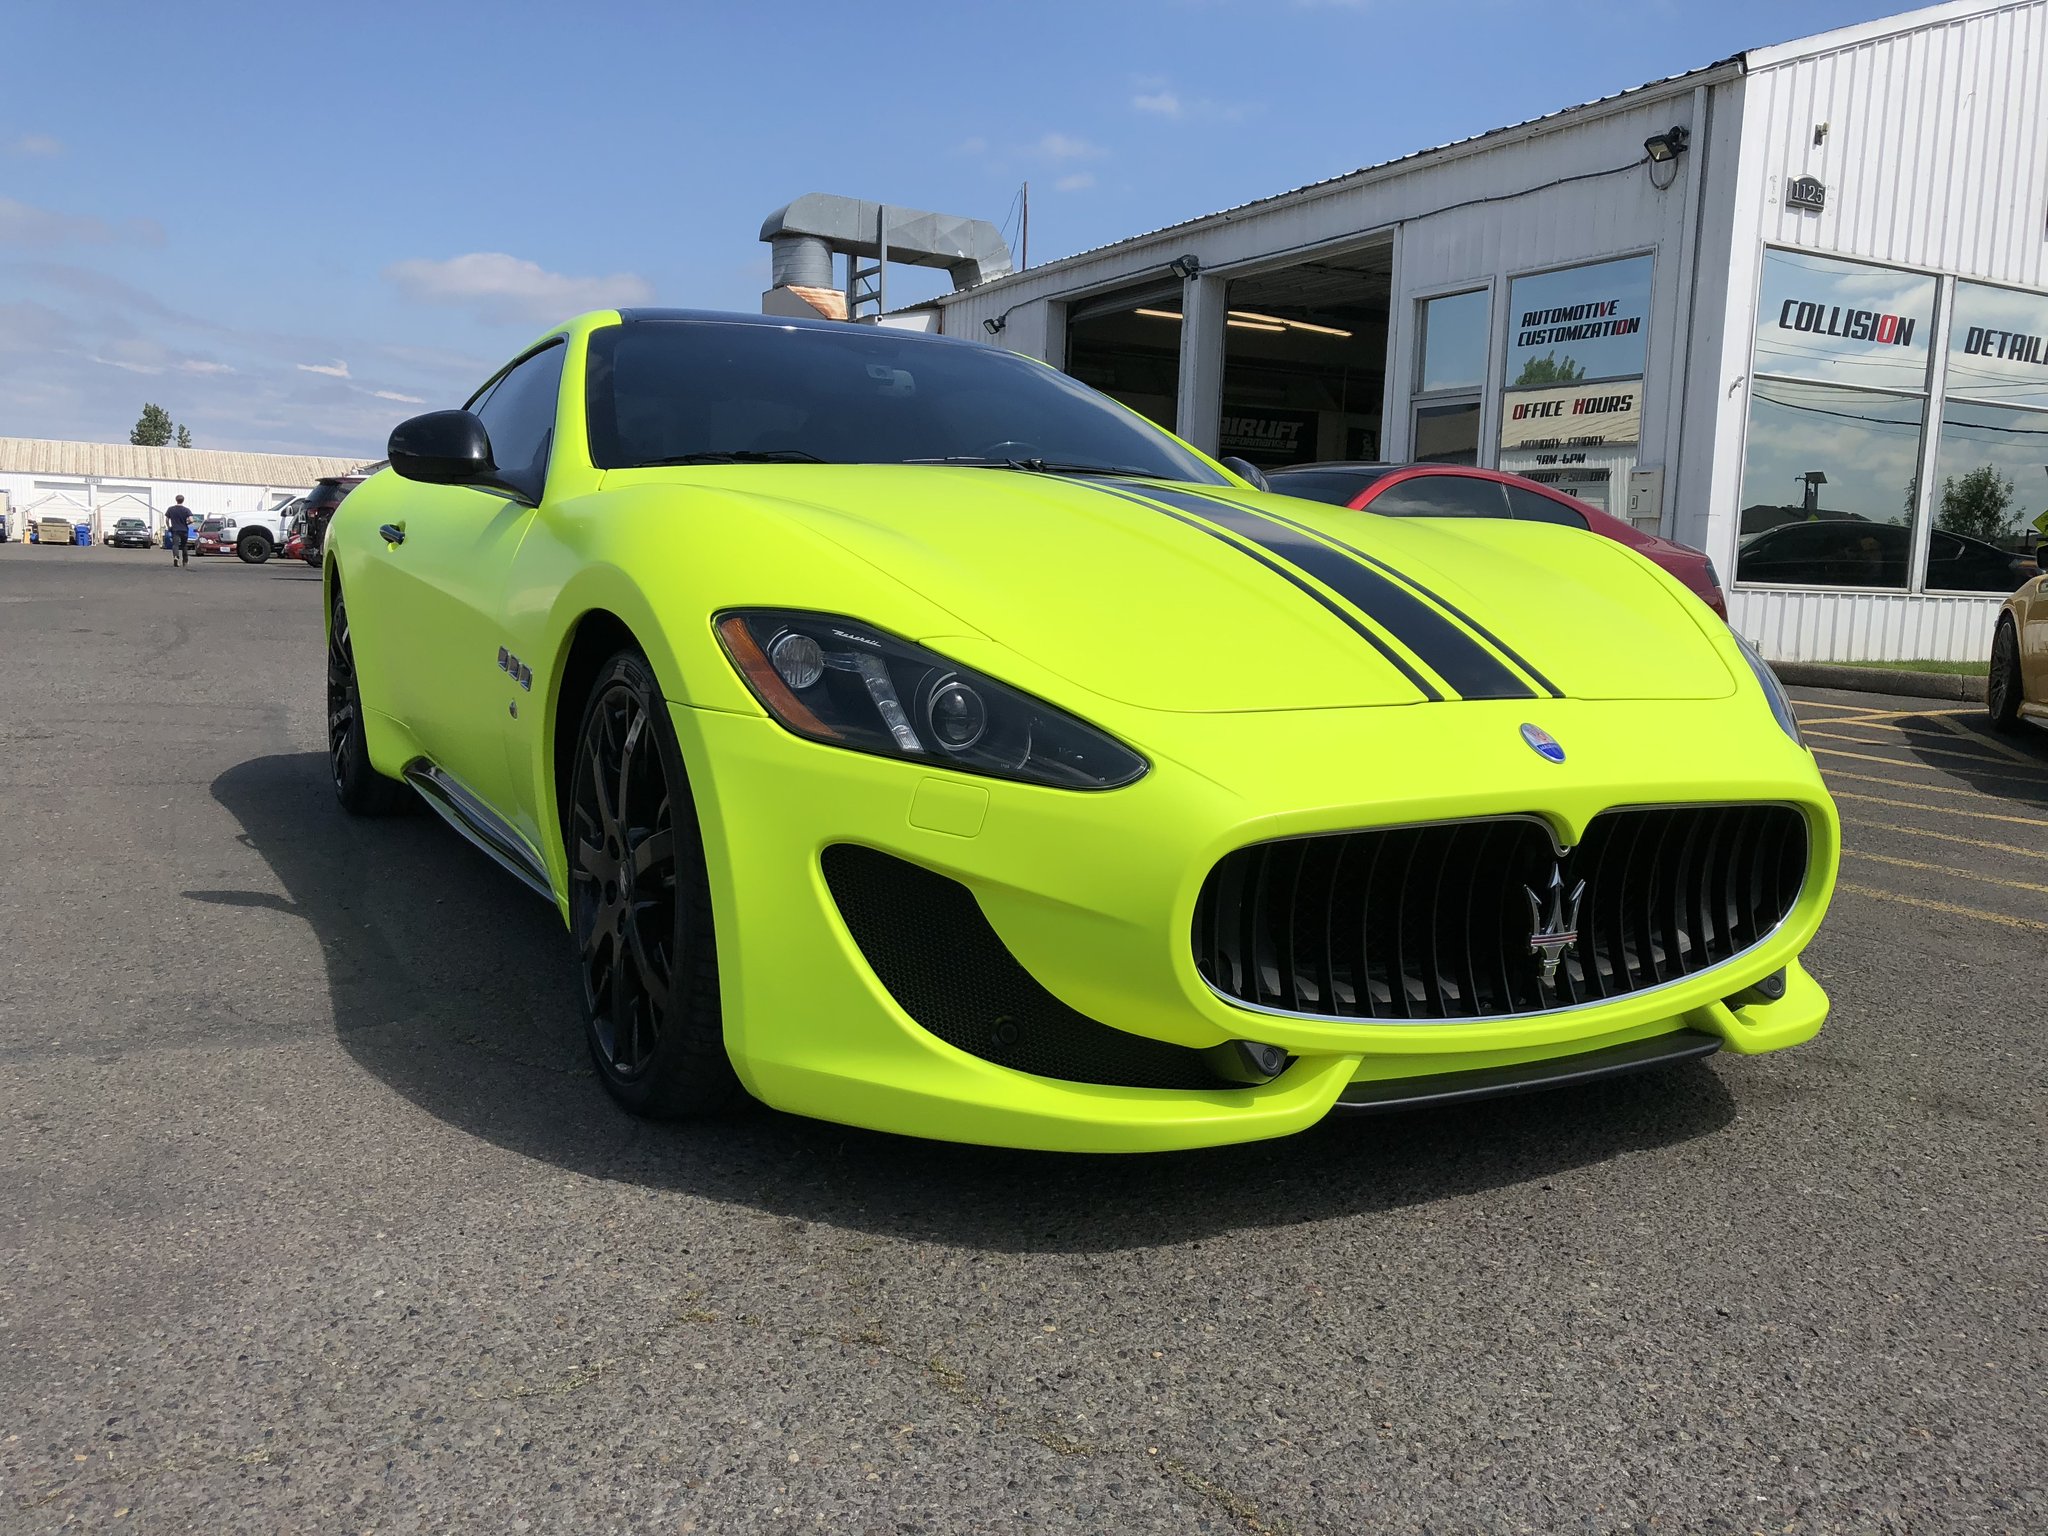 Metrorestyling On Maserati Gt Wrapped In 3mfilms